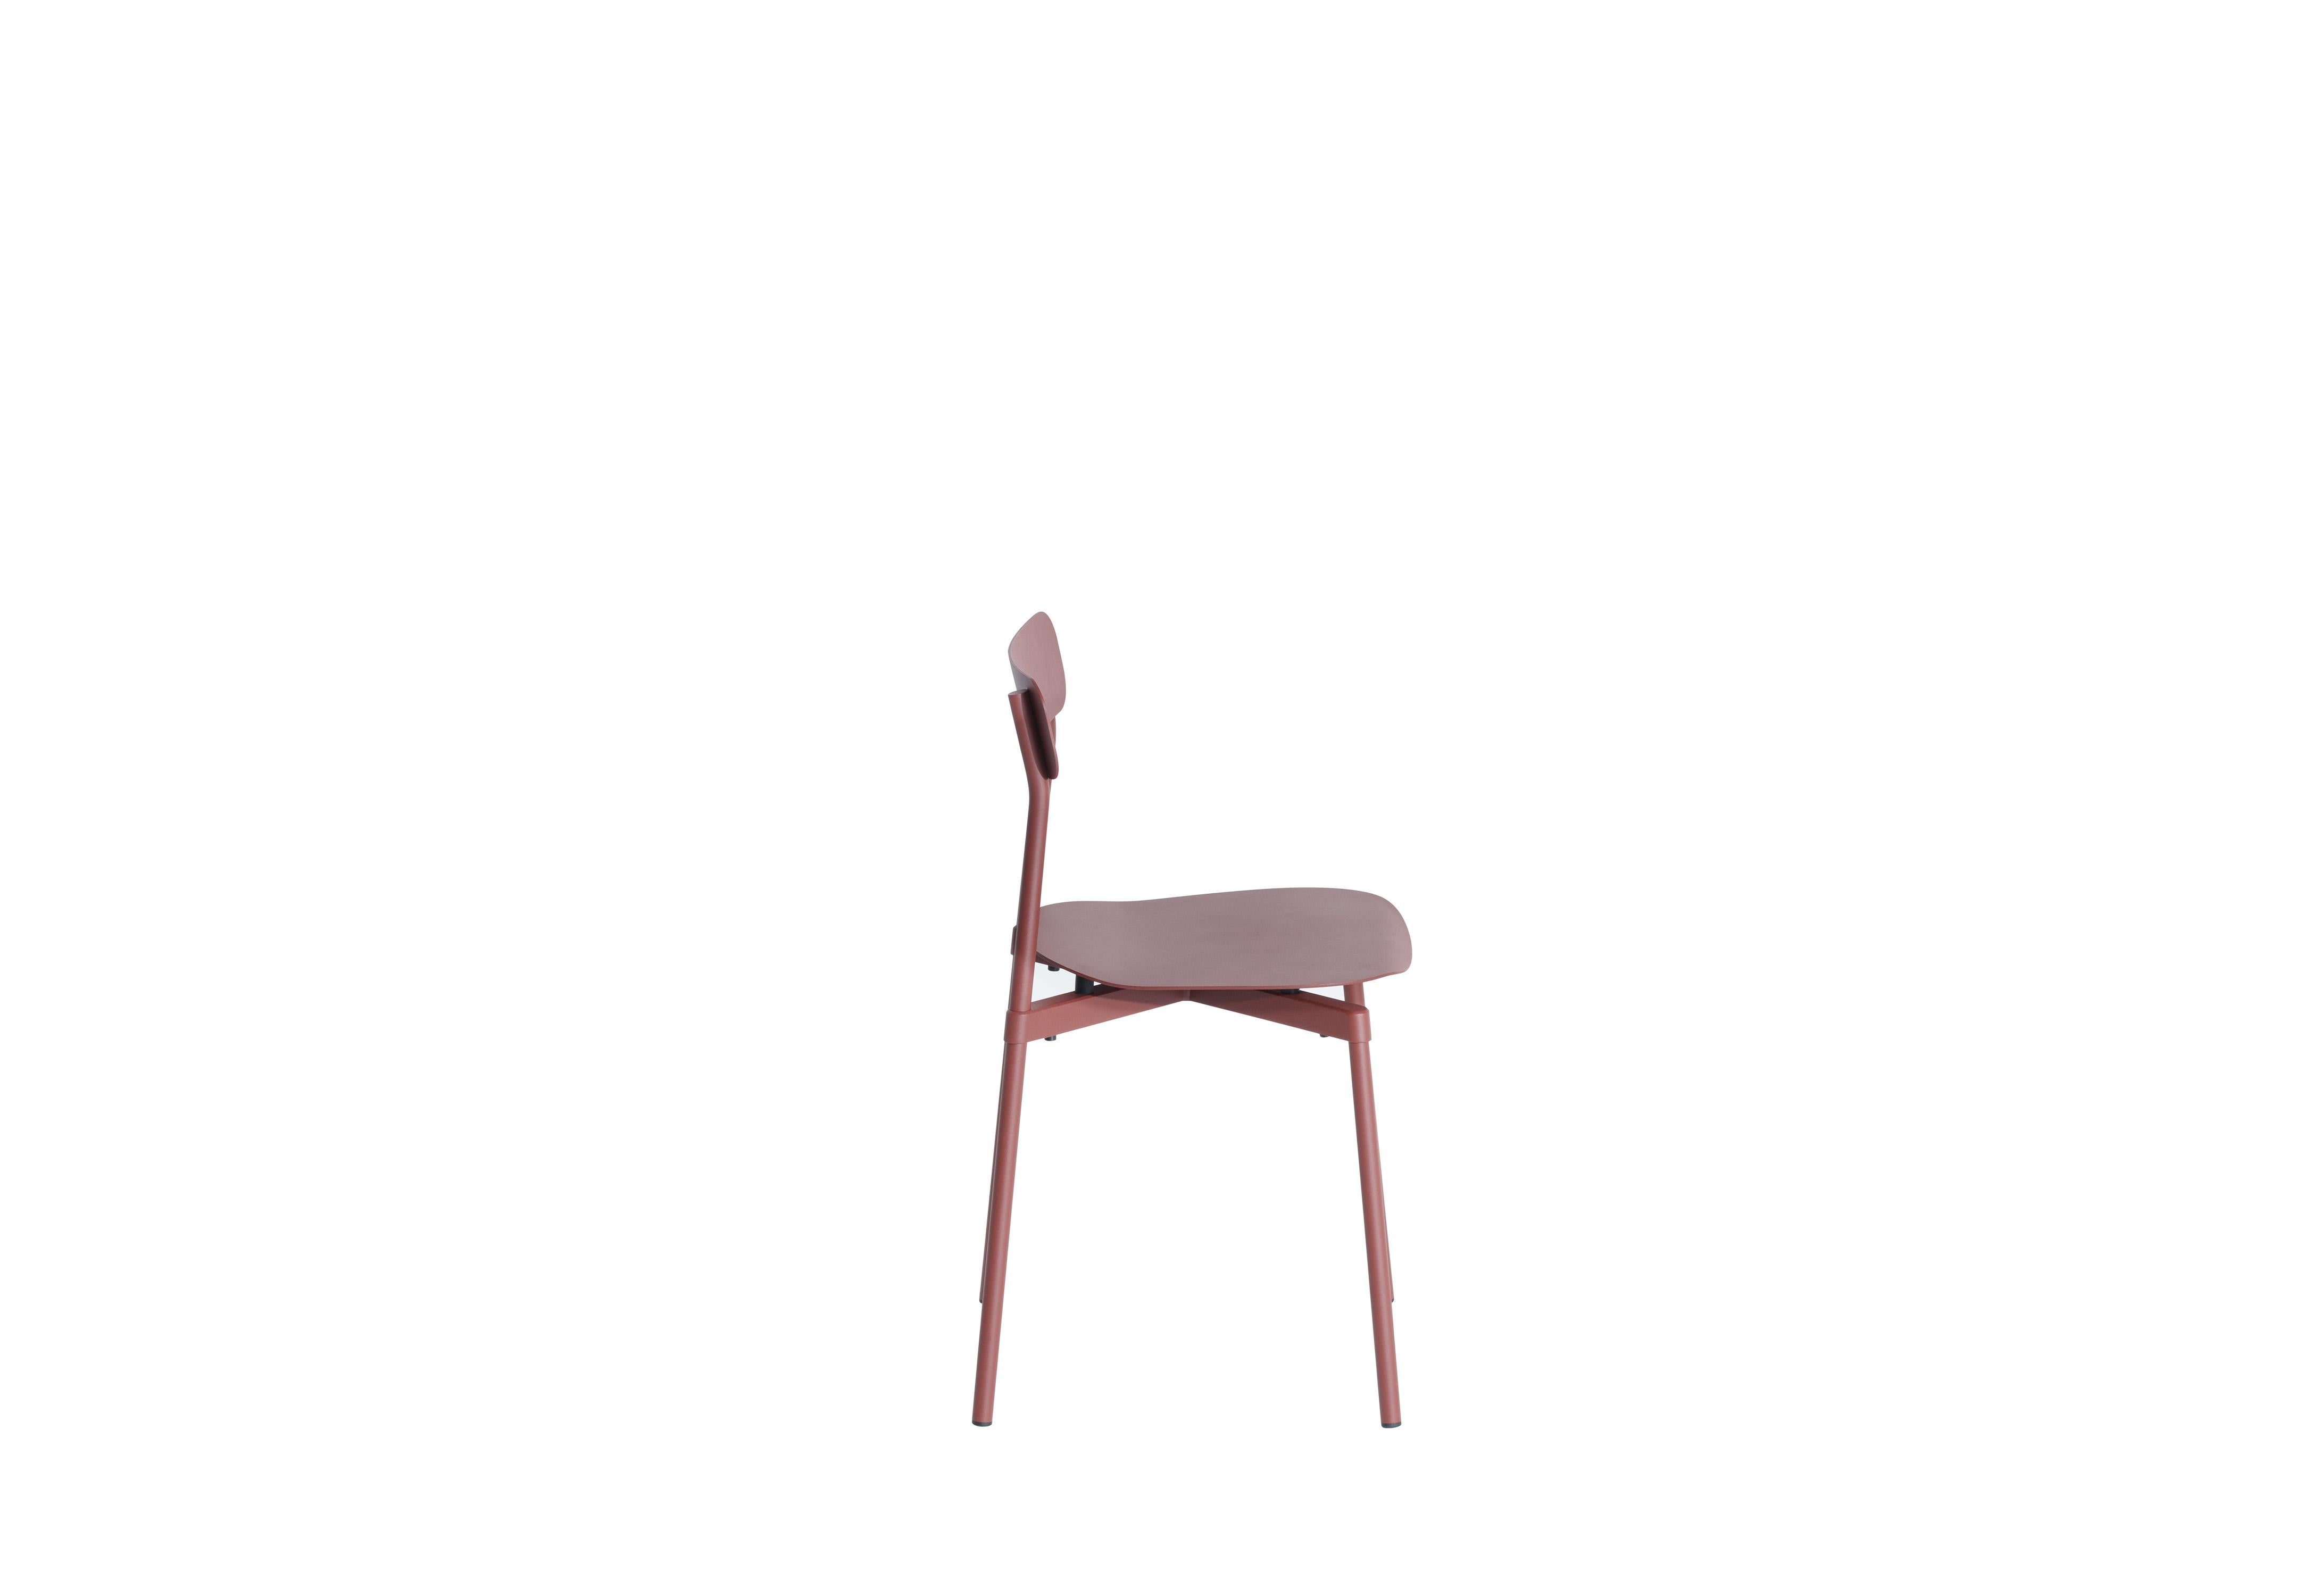 Petite Friture Fromme Chair in Brown-red Aluminium by Tom Chung, 2019

The Fromme chair stands out by its pure line and compact design. Absorbers placed under the seating gives a soft and very comfortable flexibility to the chair. Made from